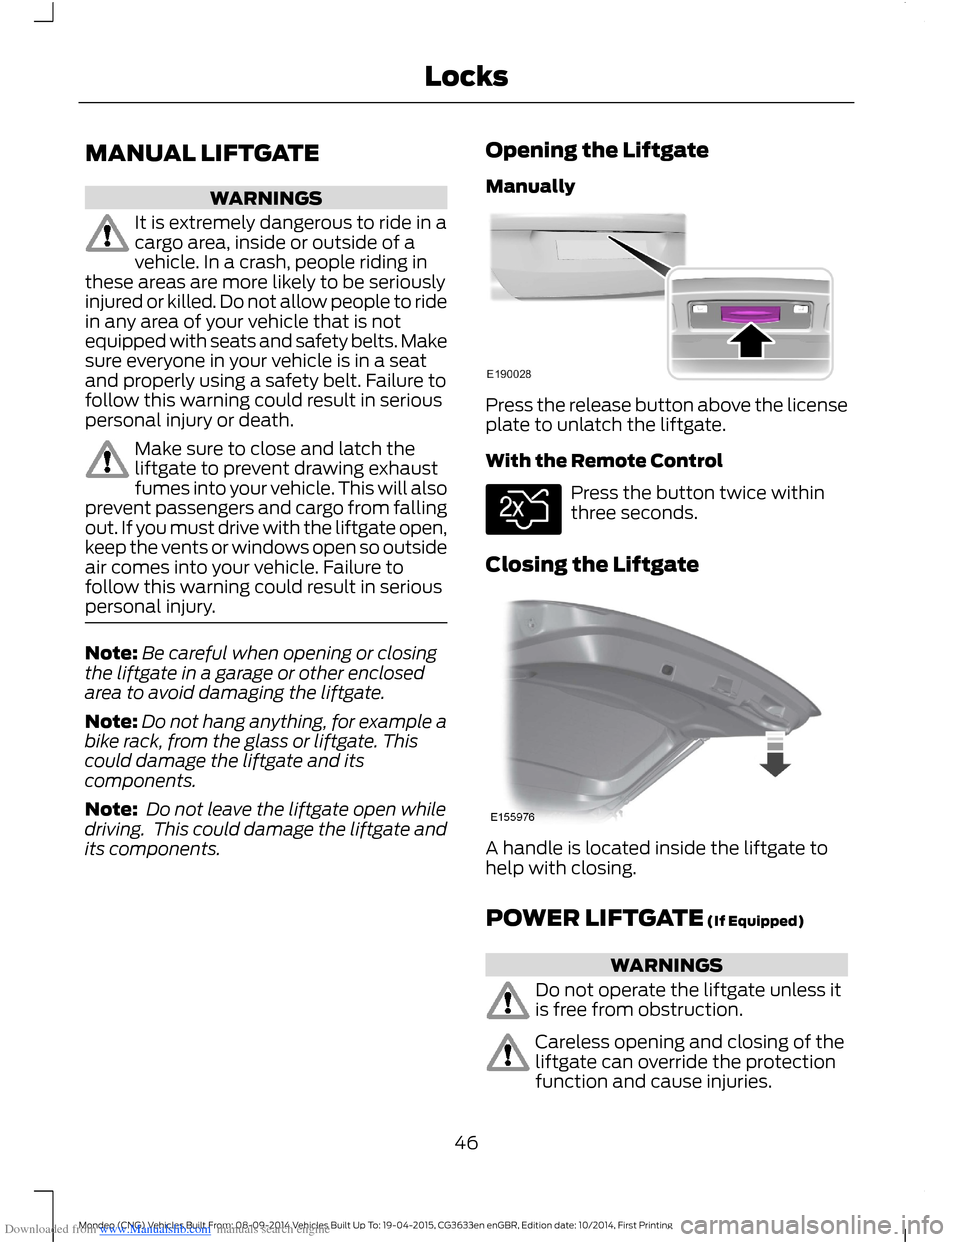 FORD MONDEO 2014 4.G Service Manual Downloaded from www.Manualslib.com manuals search engine MANUAL LIFTGATE
WARNINGS
It is extremely dangerous to ride in acargo area, inside or outside of avehicle. In a crash, people riding inthese are